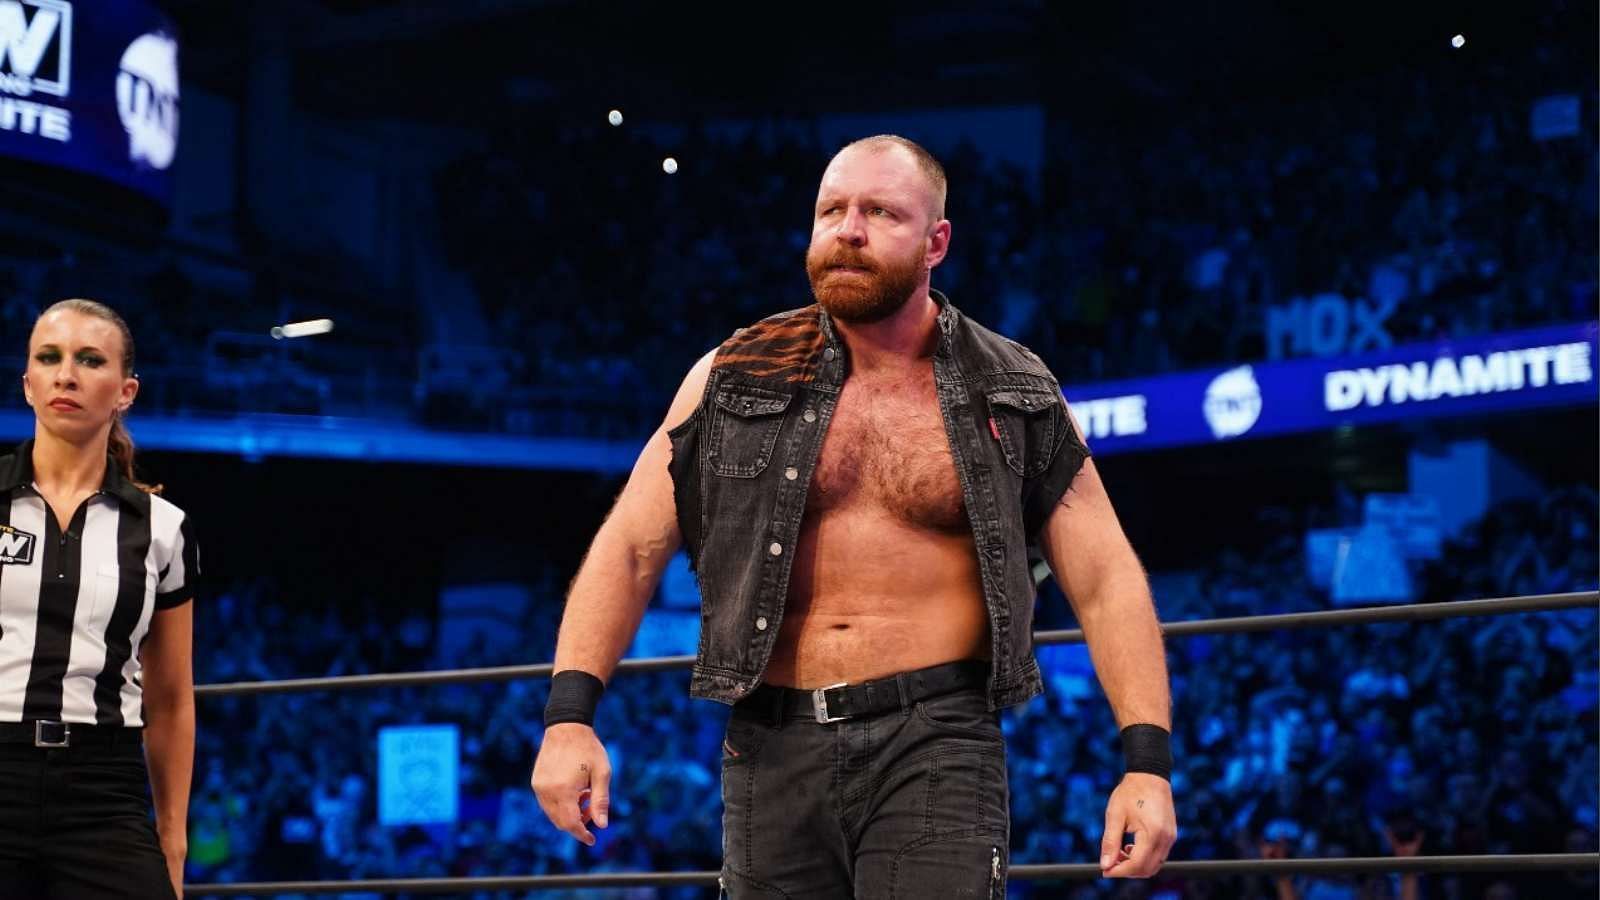 This AEW star does not want anything to do with Jon Moxley